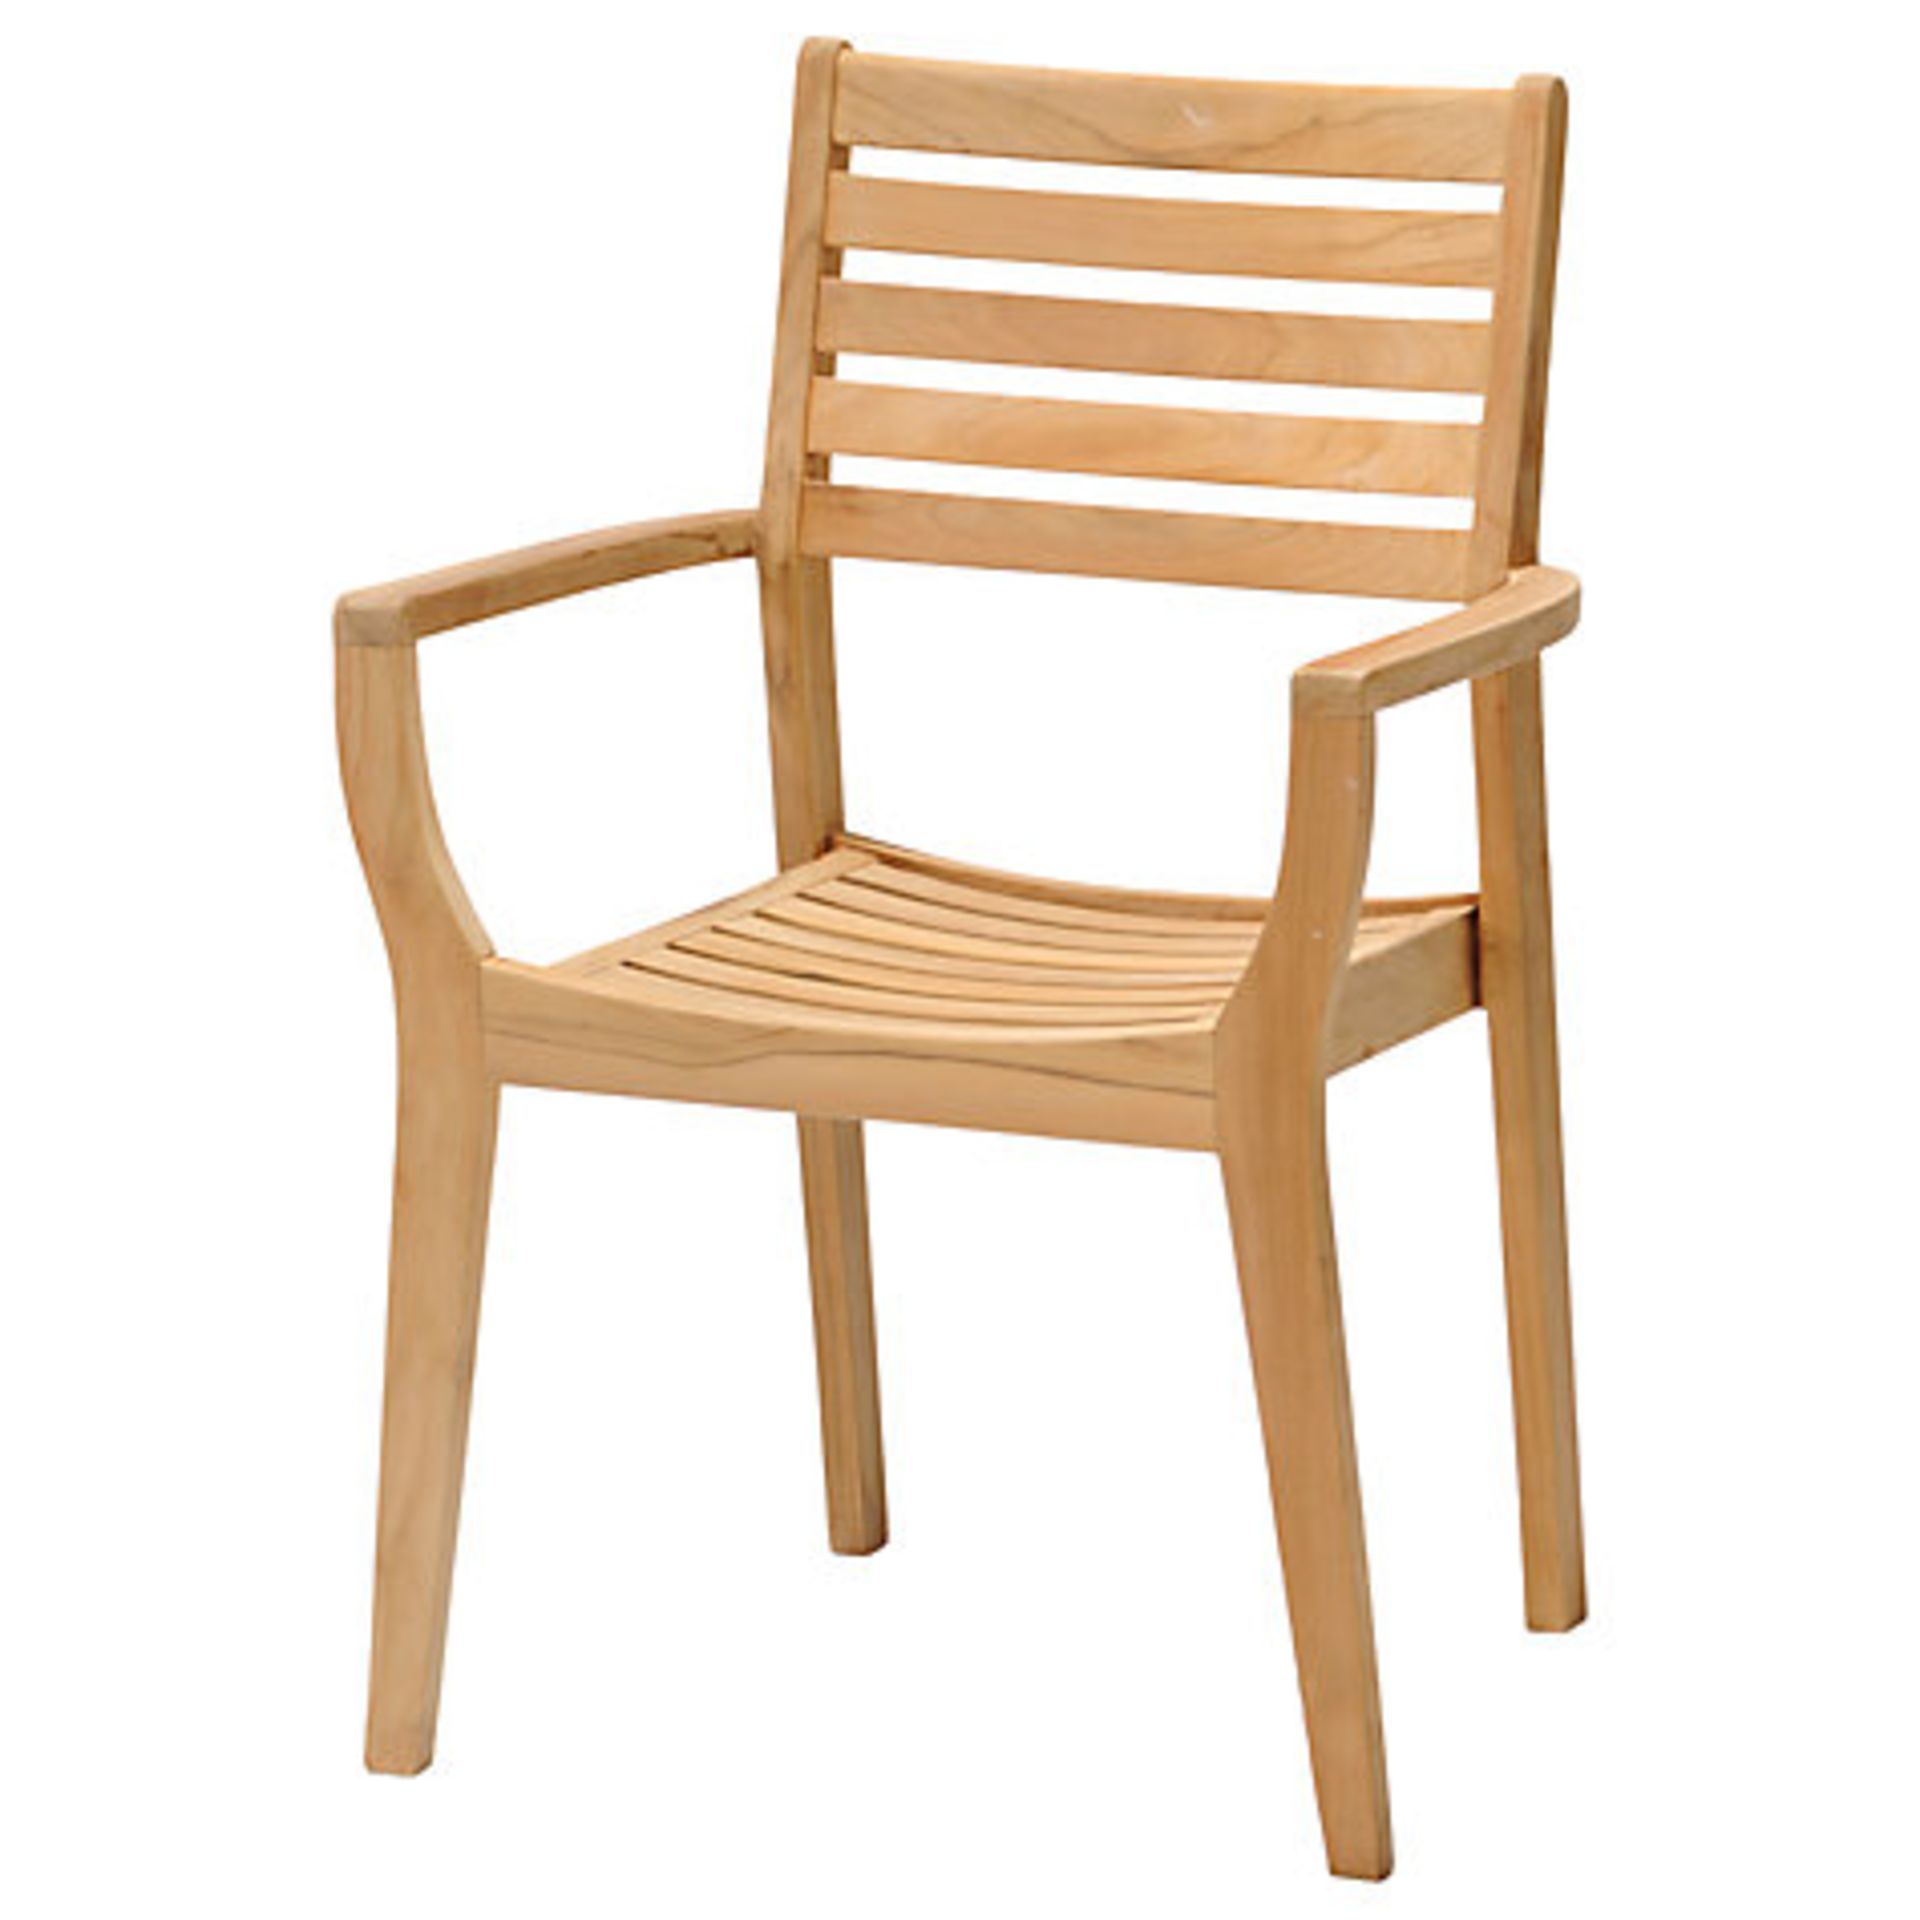 4 x BOXED LONG STOCK STACKING CHAIRS RRP £165 EACH (09/11/17) (2533880) *PLEASE NOTE THAT THE BID